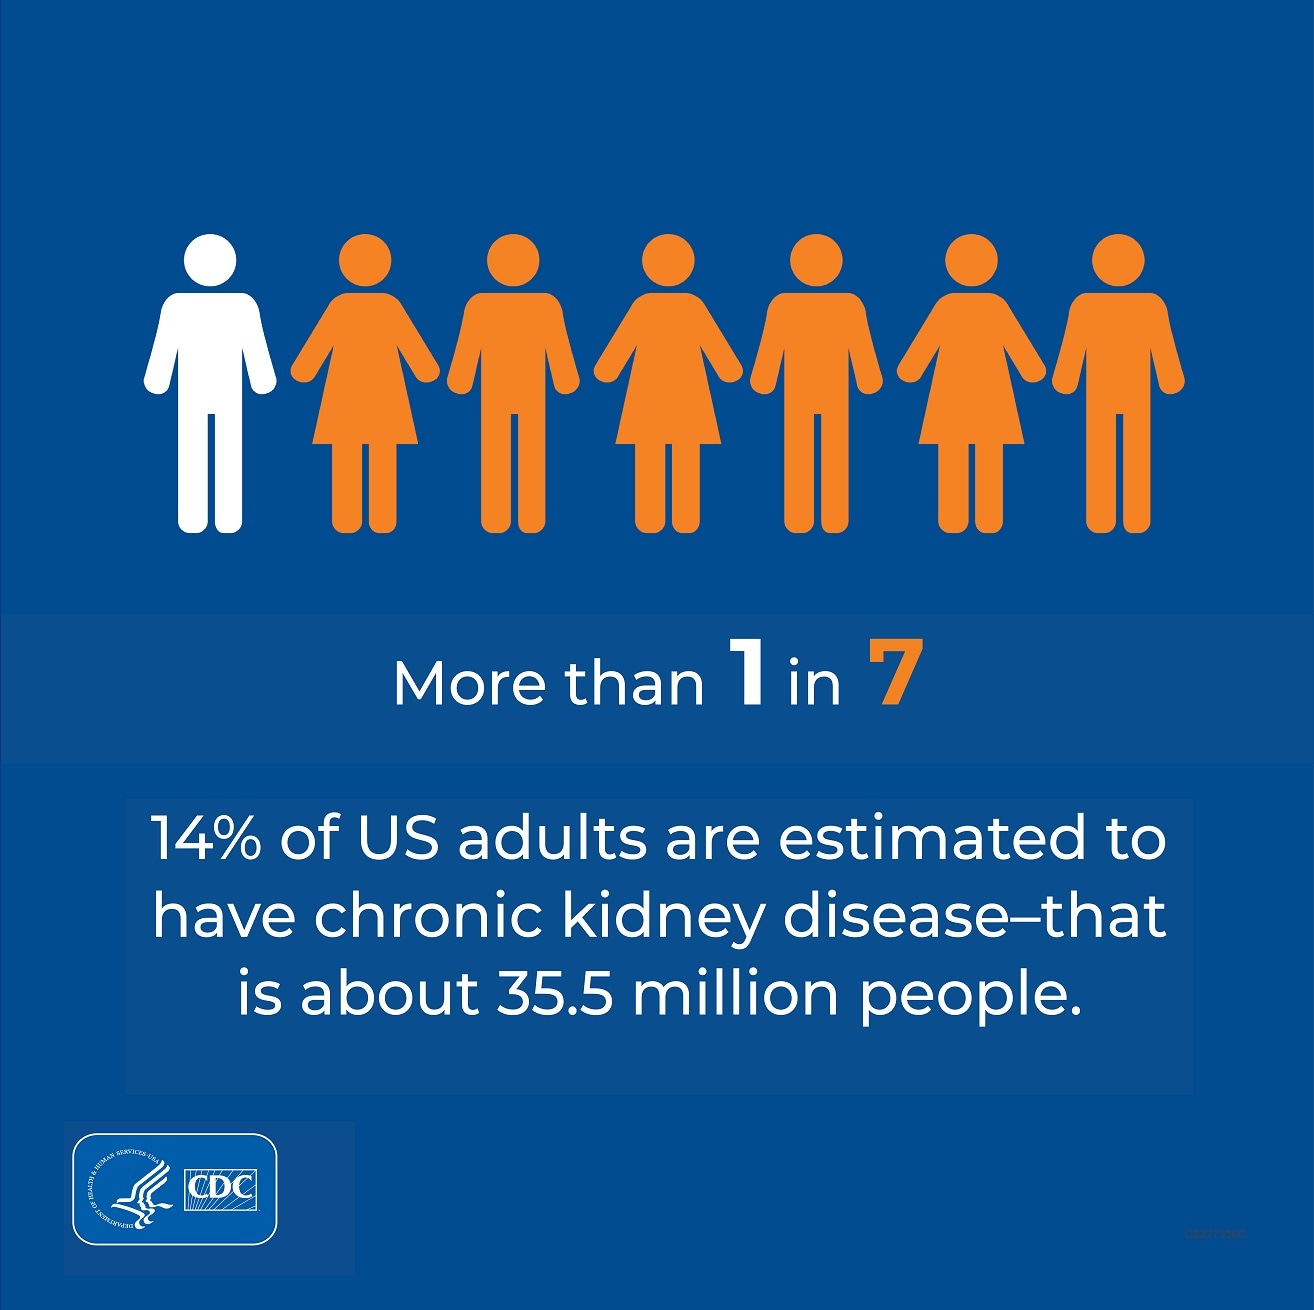 9. Kidney disease can affect people of all ages and backgrounds.